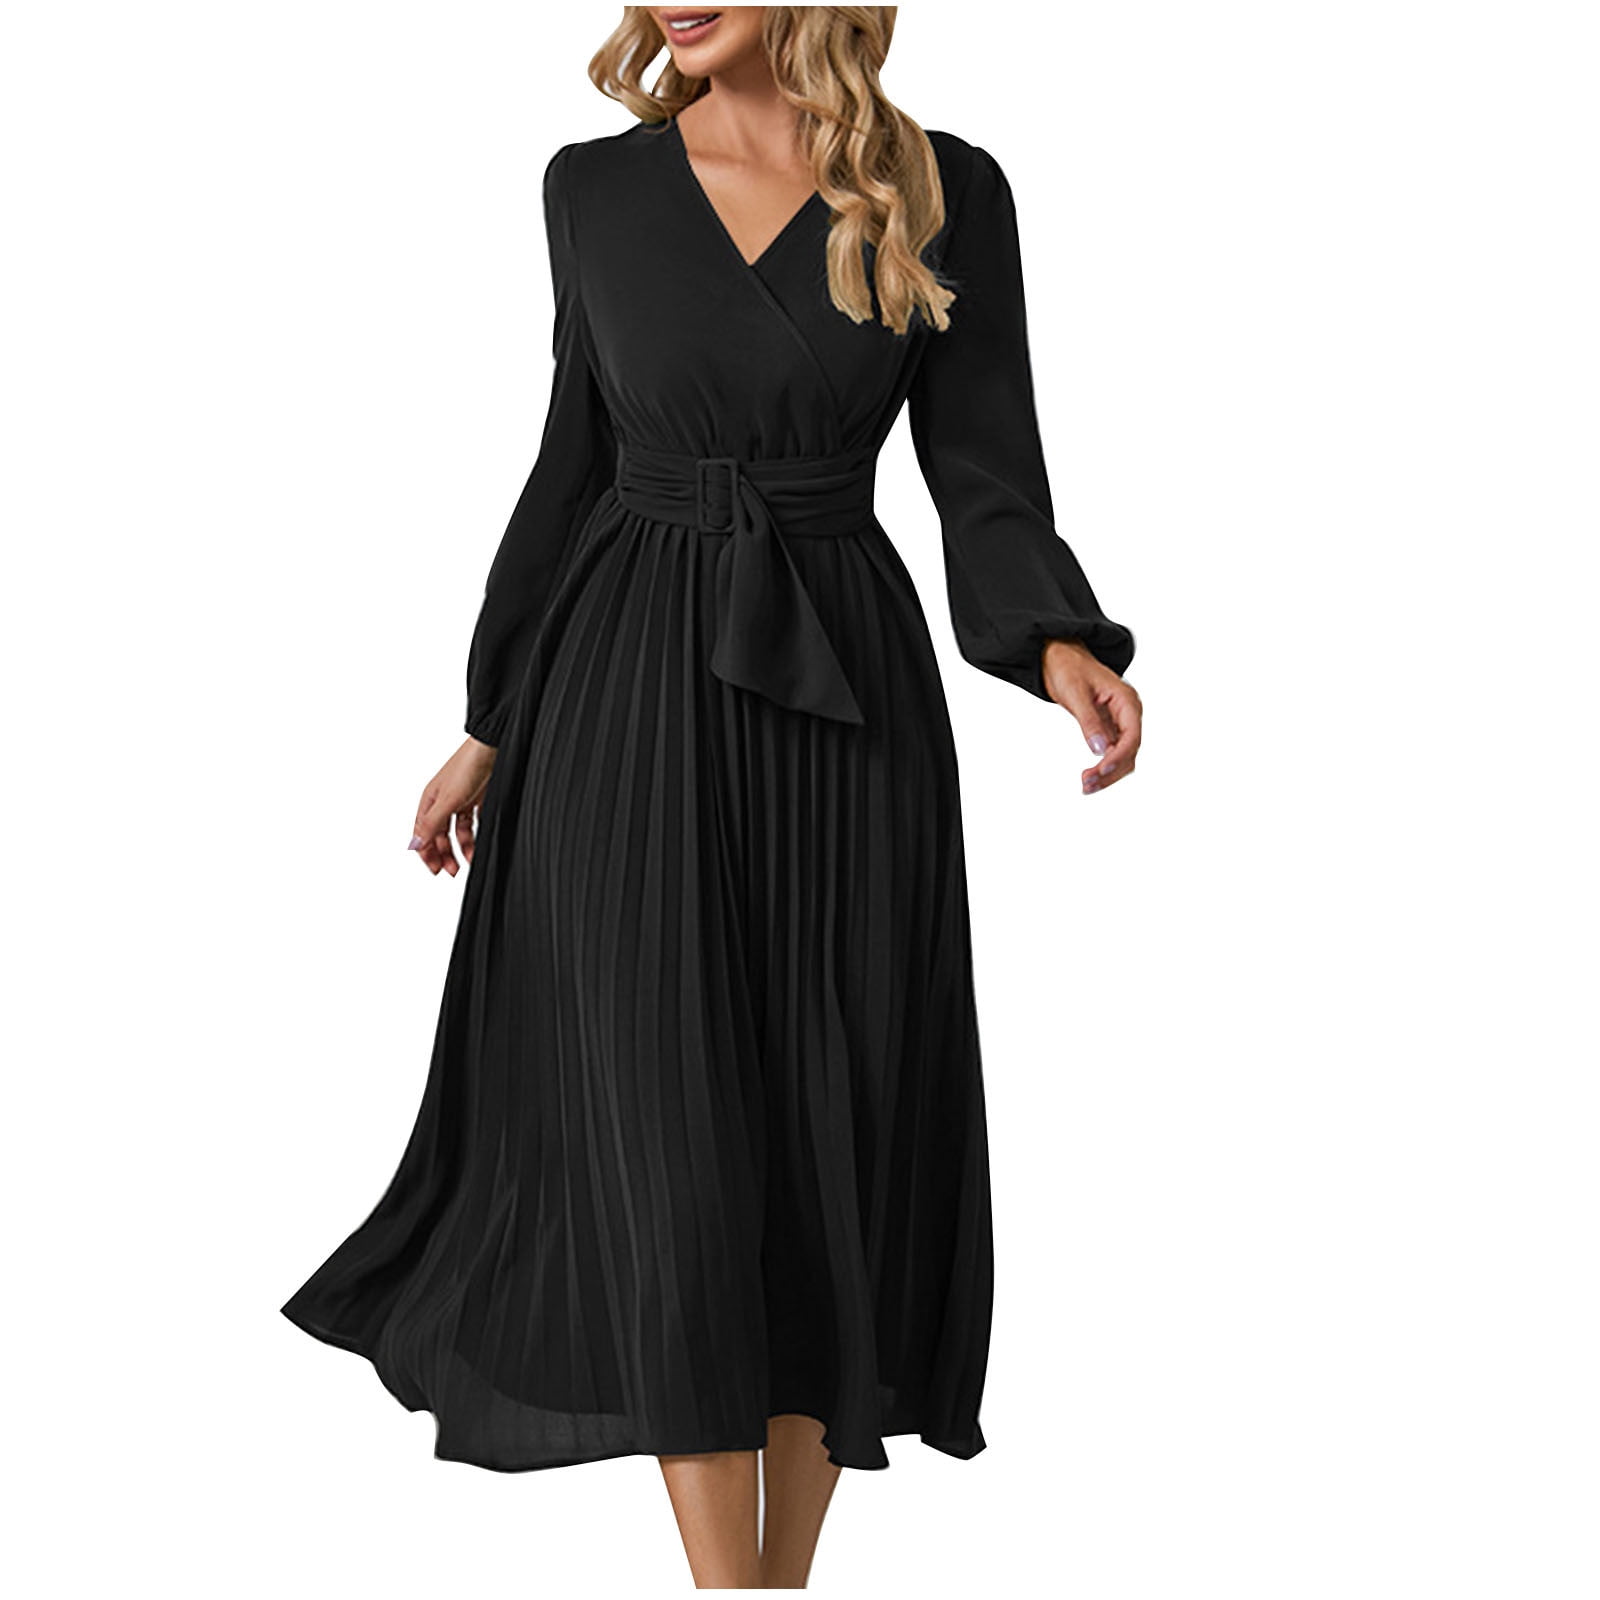 dresses for a funeral